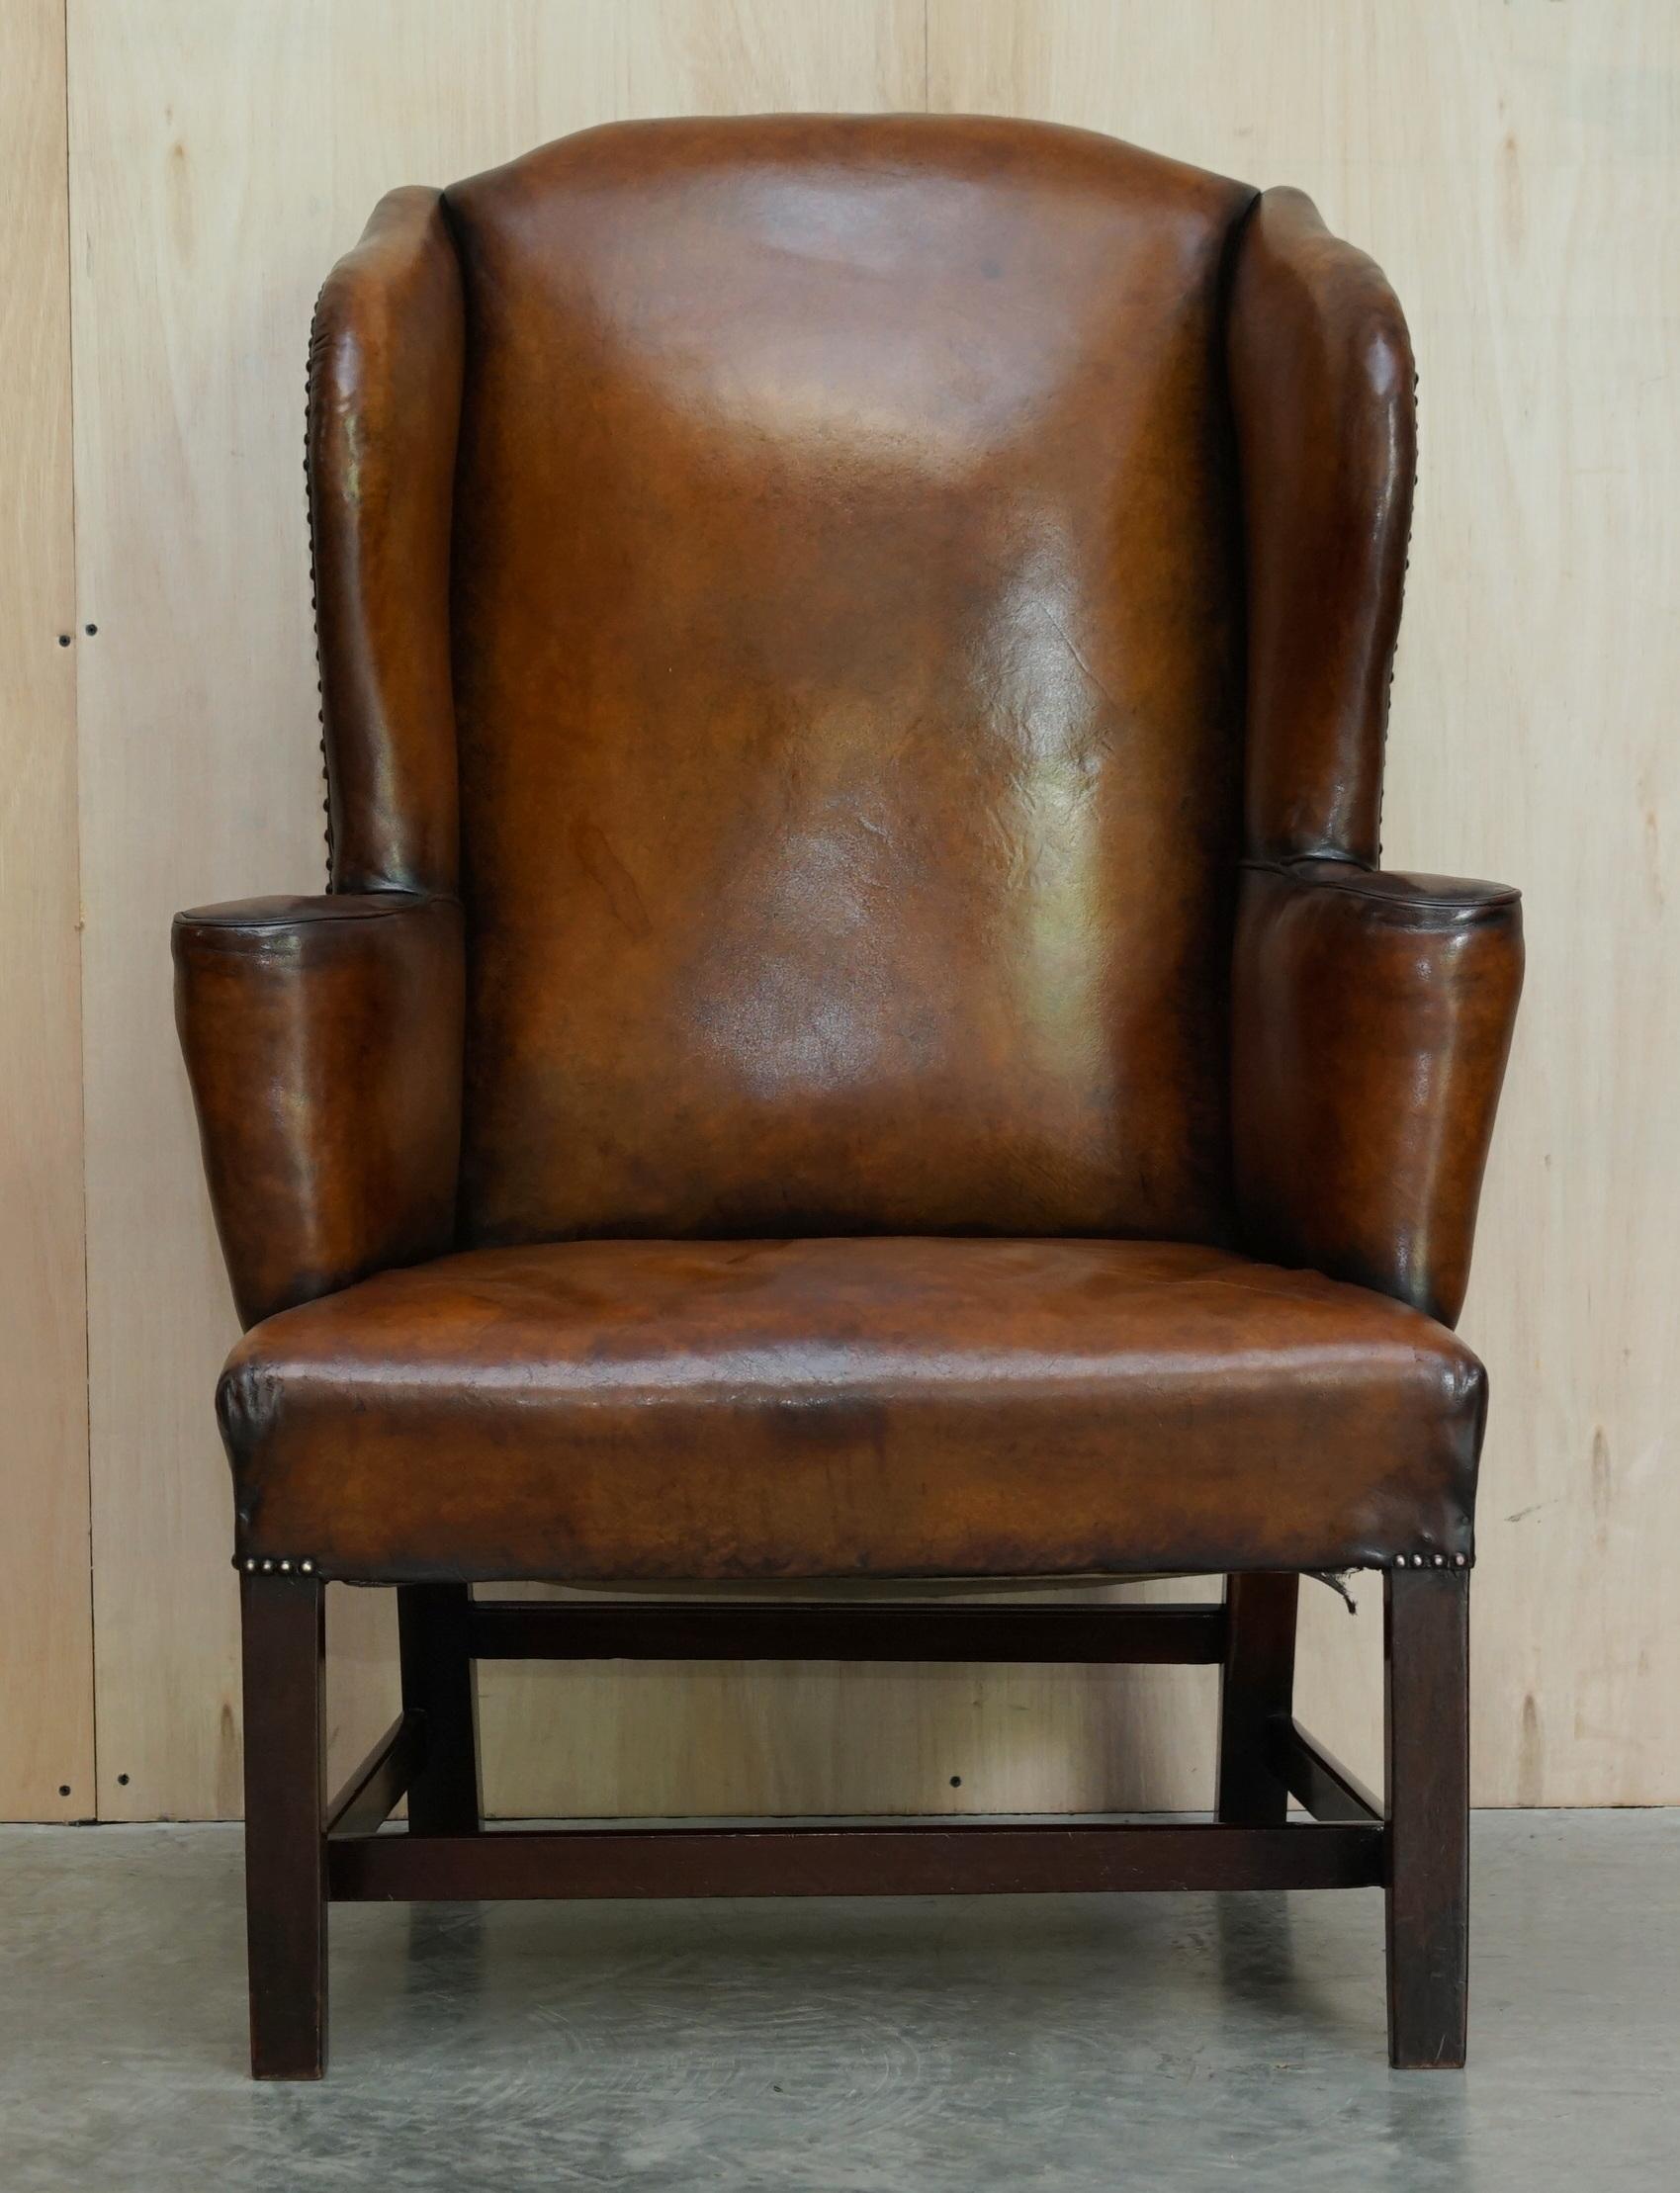 We are delighted to offer for sale this stunning, fully restored, hand dyed, very rare George II circa 1760 Wingback armchair.

A simply glorious piece, the frame has the traditional George II narrow wings and flat top arms, it is the exact right